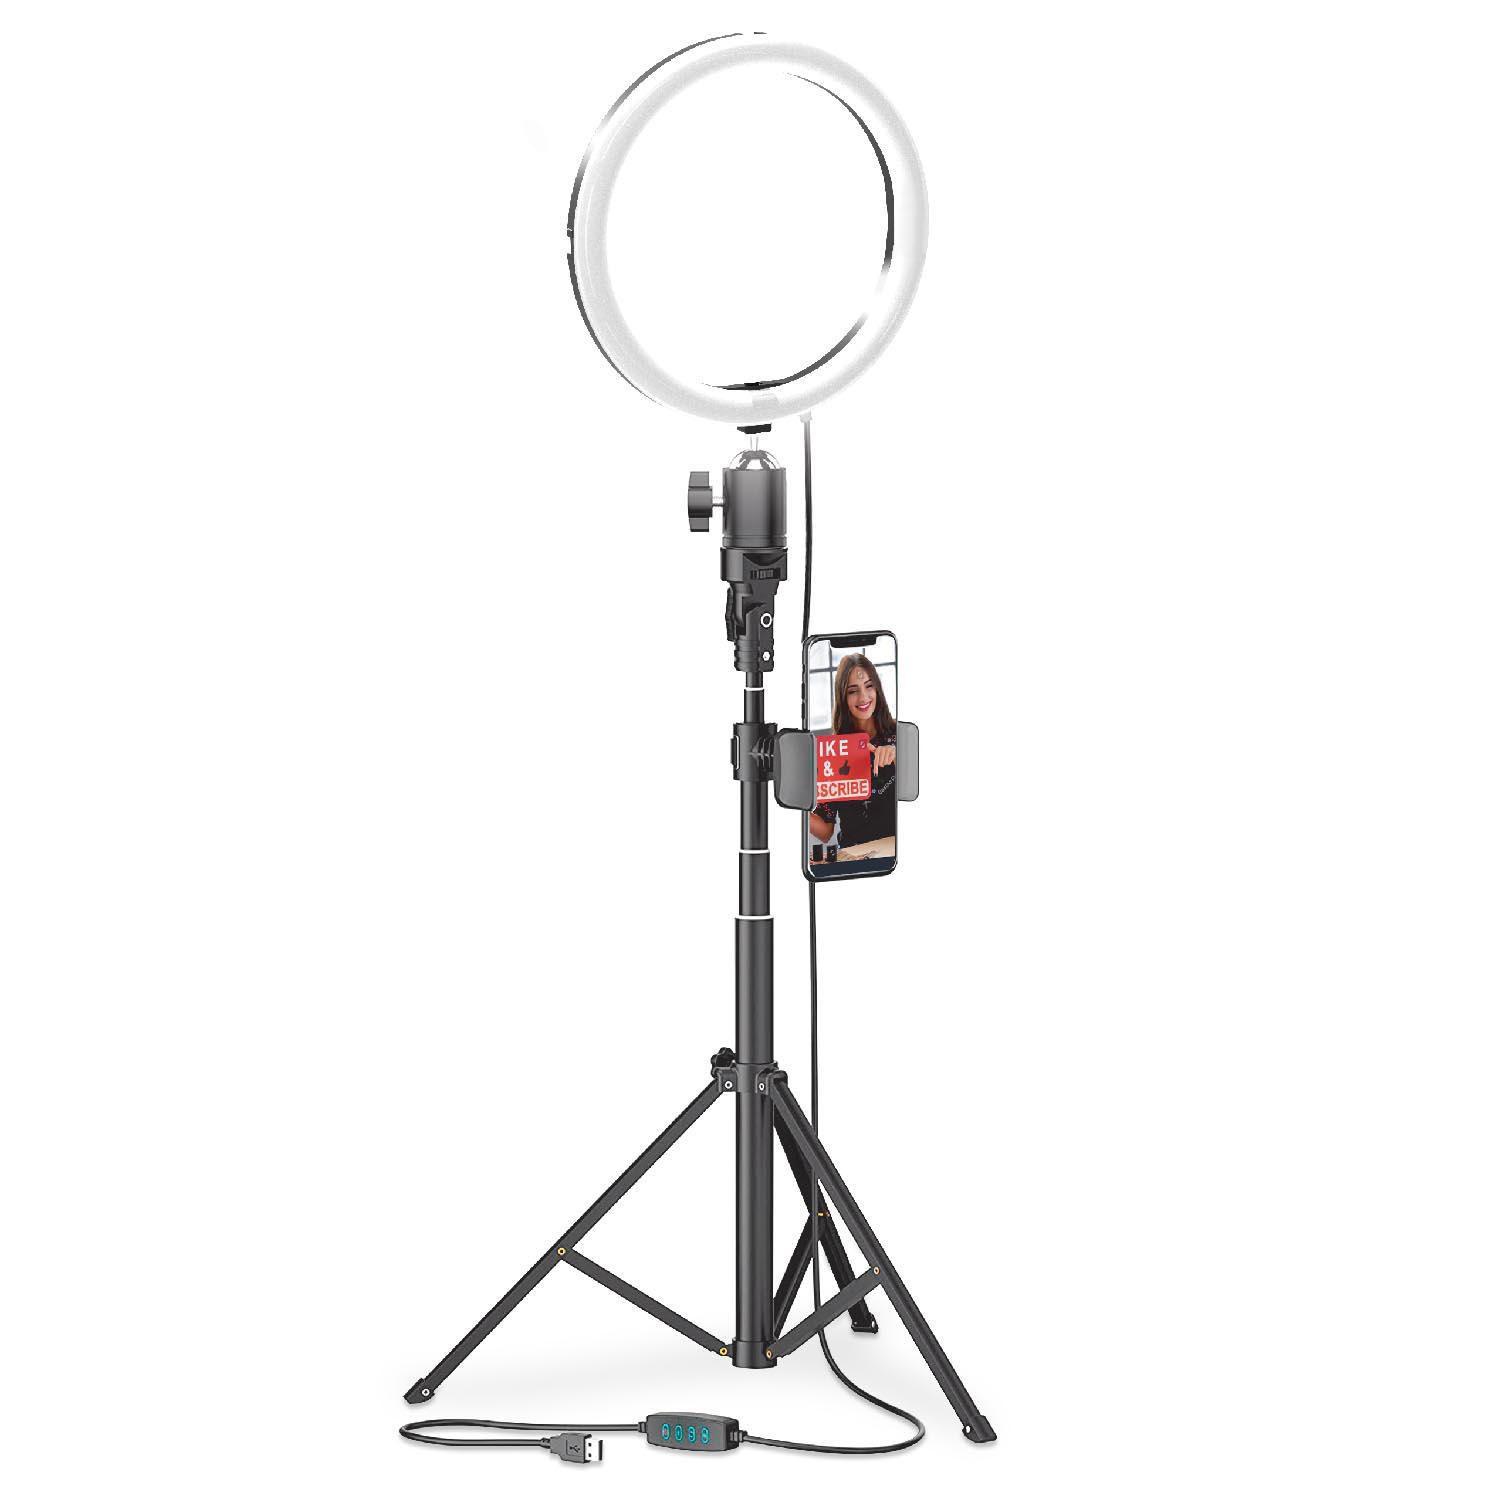 Bower 8in Selfie ring light studio with 51in extendable tripod + phone